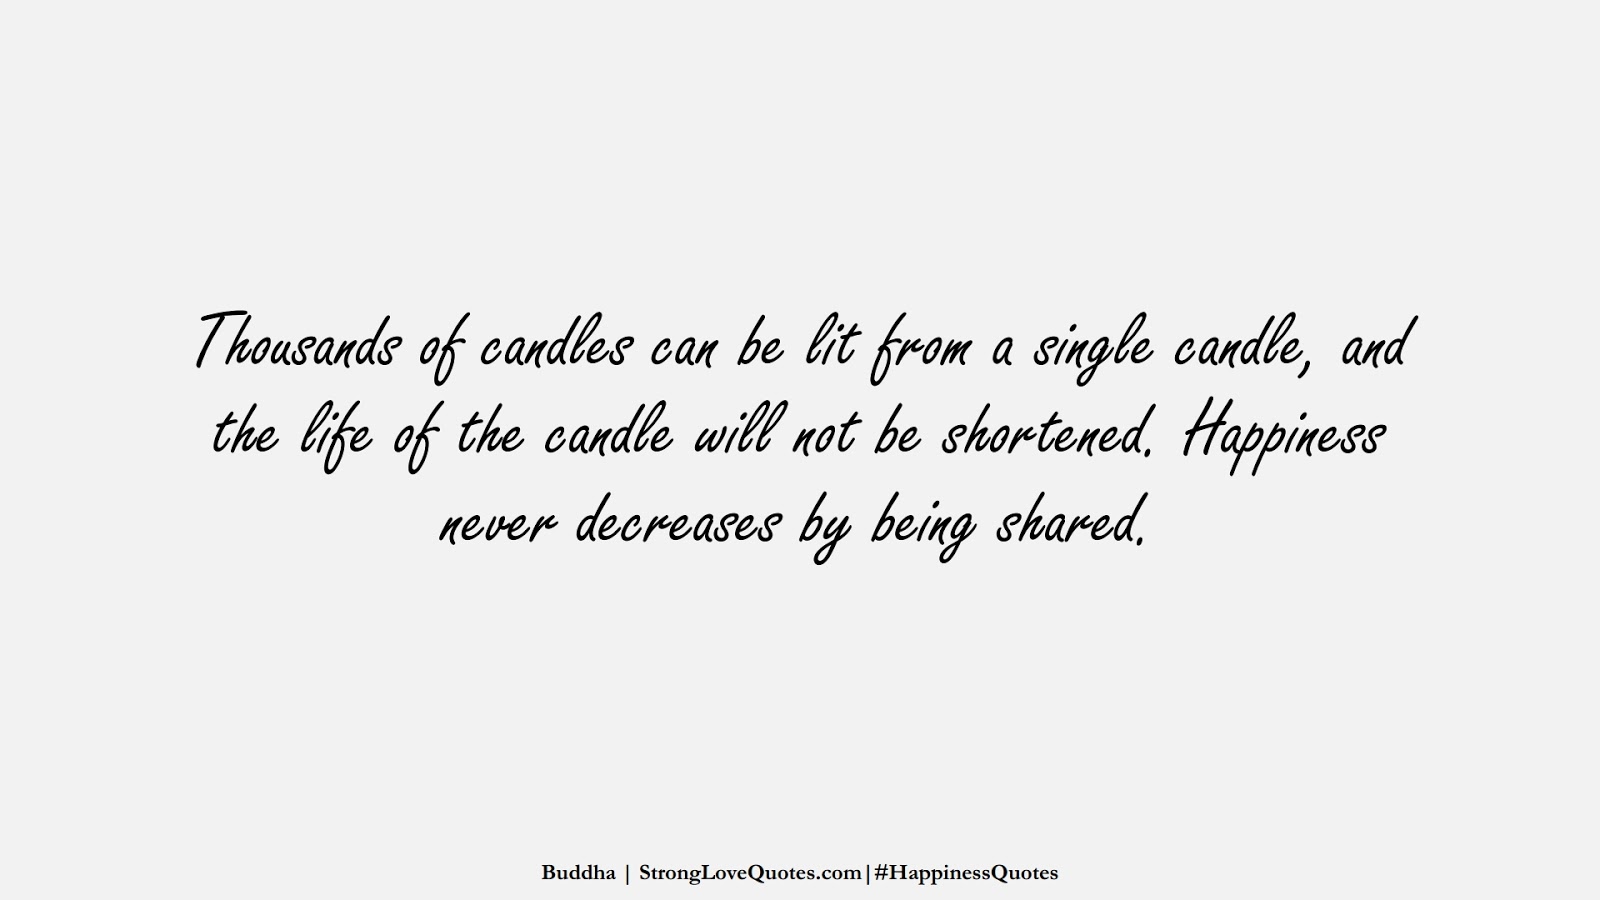 Thousands of candles can be lit from a single candle, and the life of the candle will not be shortened. Happiness never decreases by being shared. (Buddha);  #HappinessQuotes